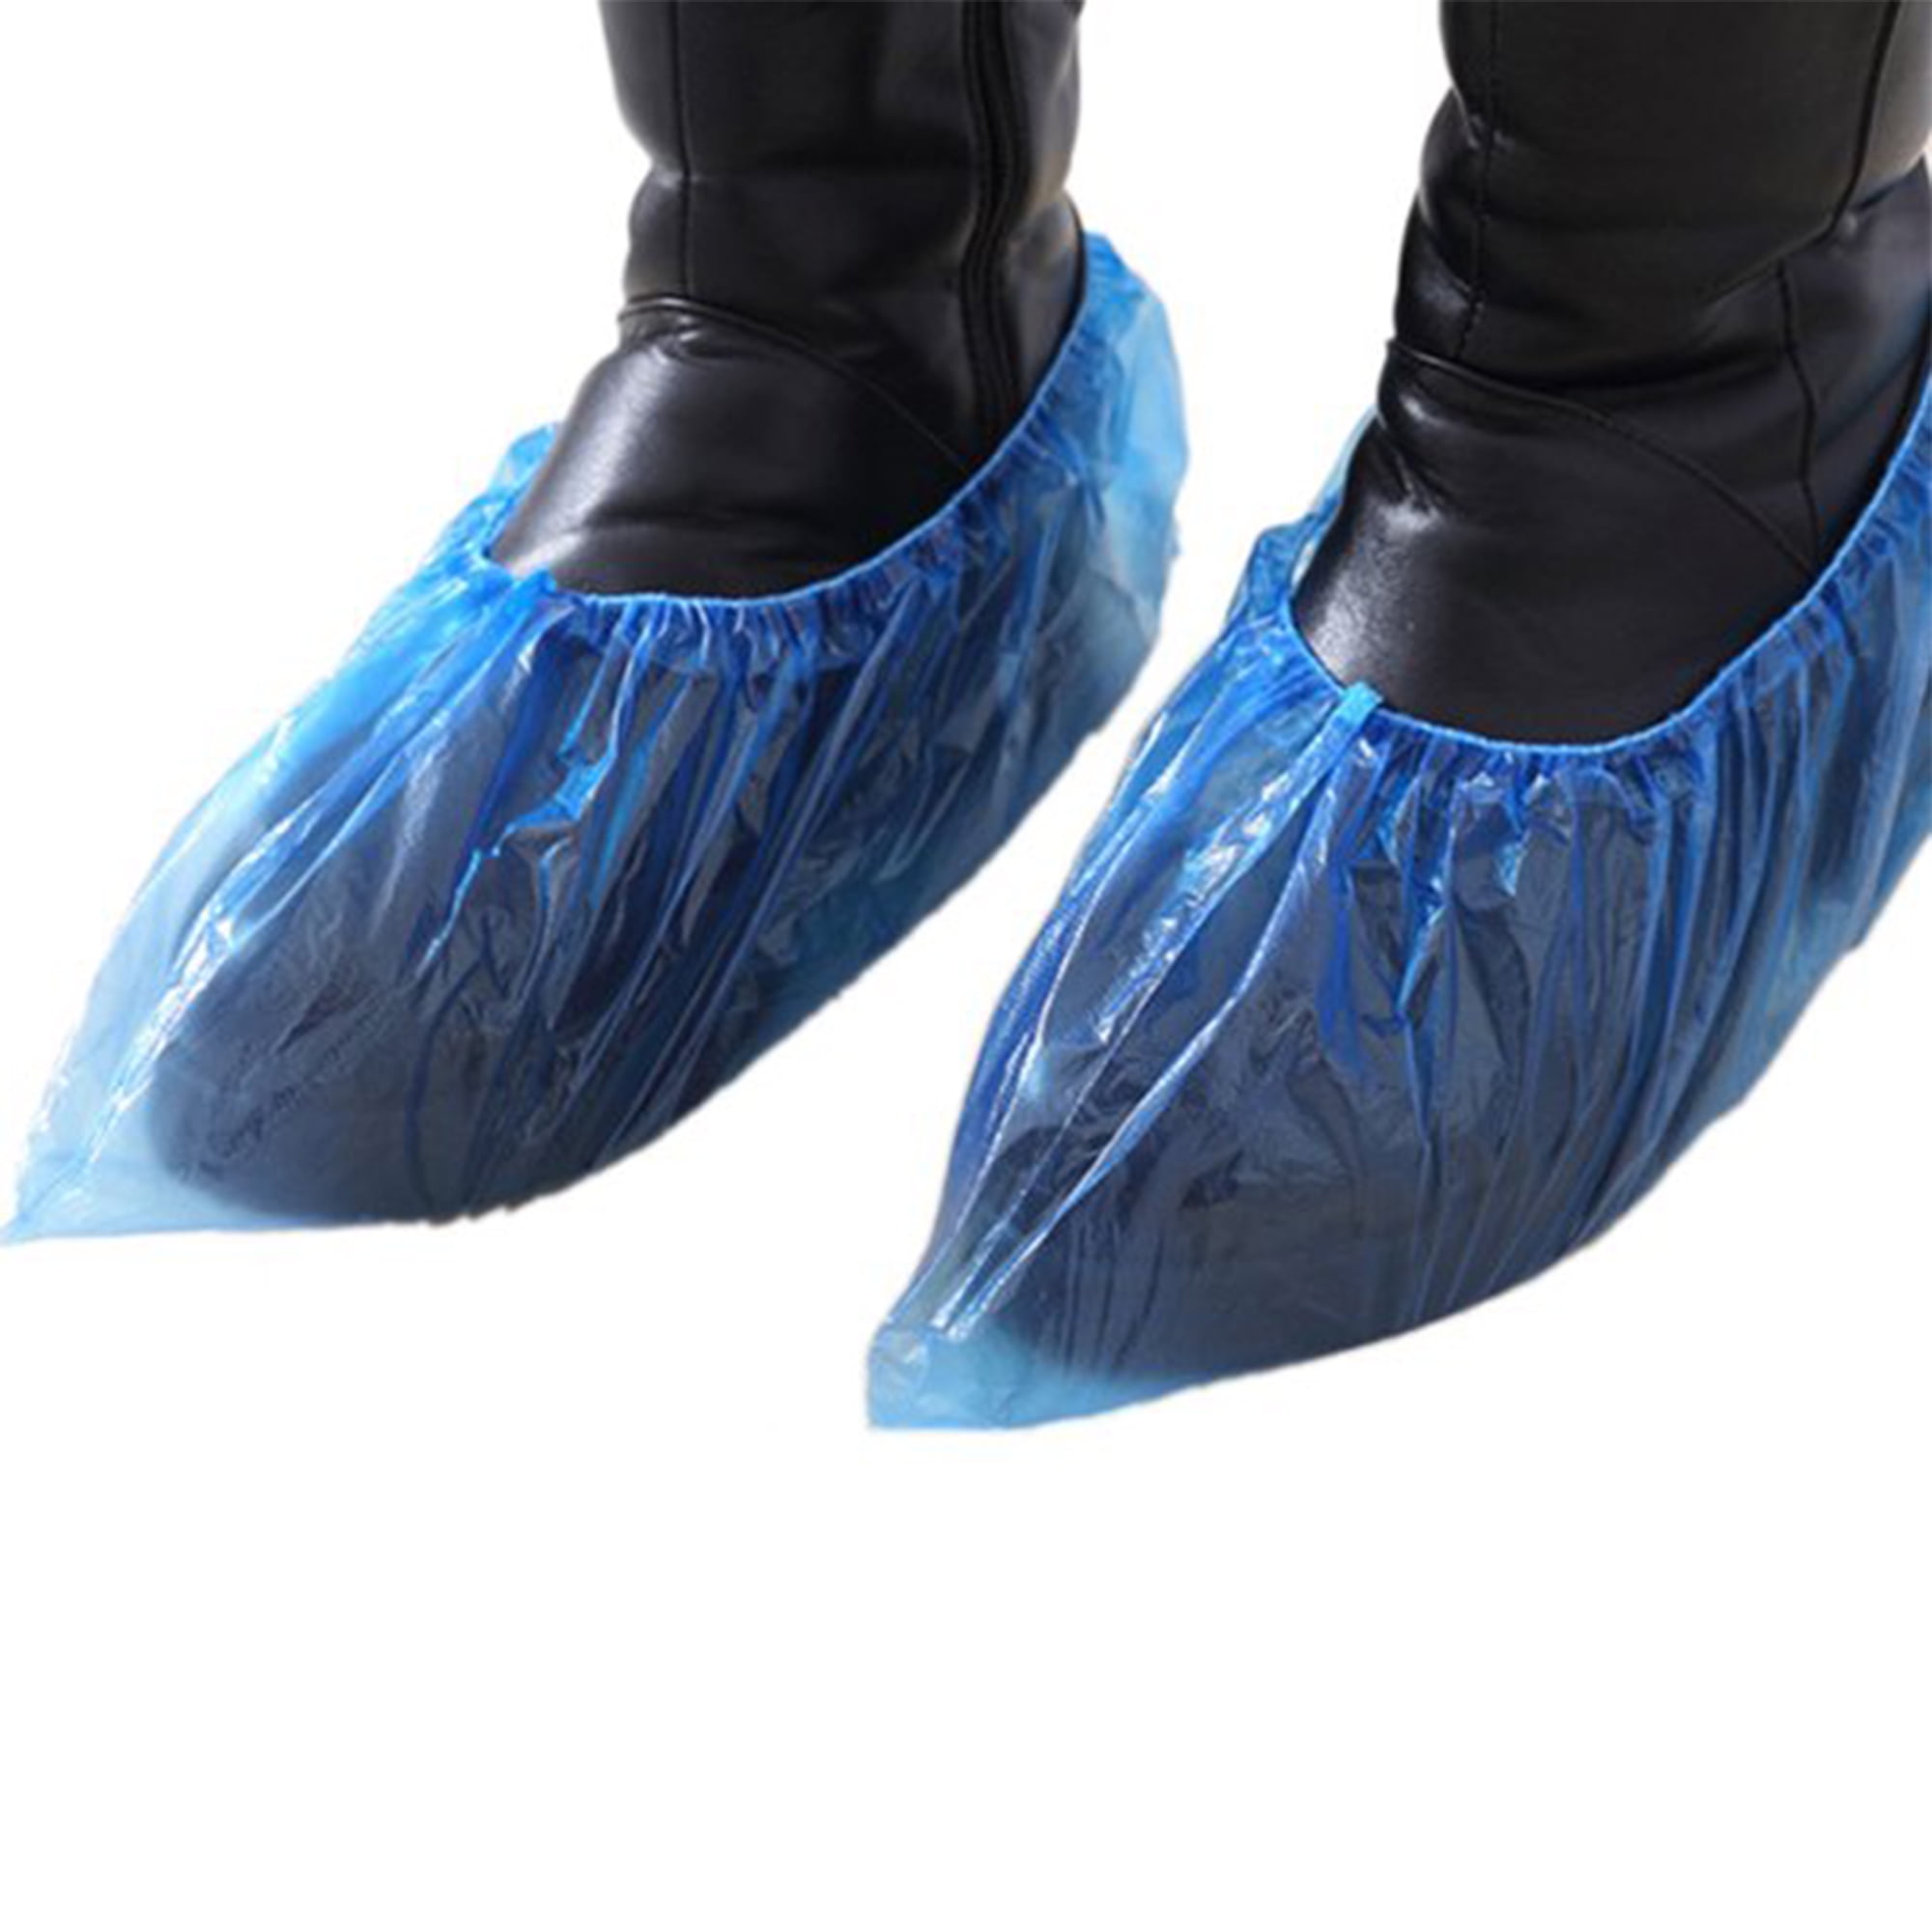 100Pcs Disposable Shoe Covers Waterproof Boot Covers Plastic Overshoes Covers 